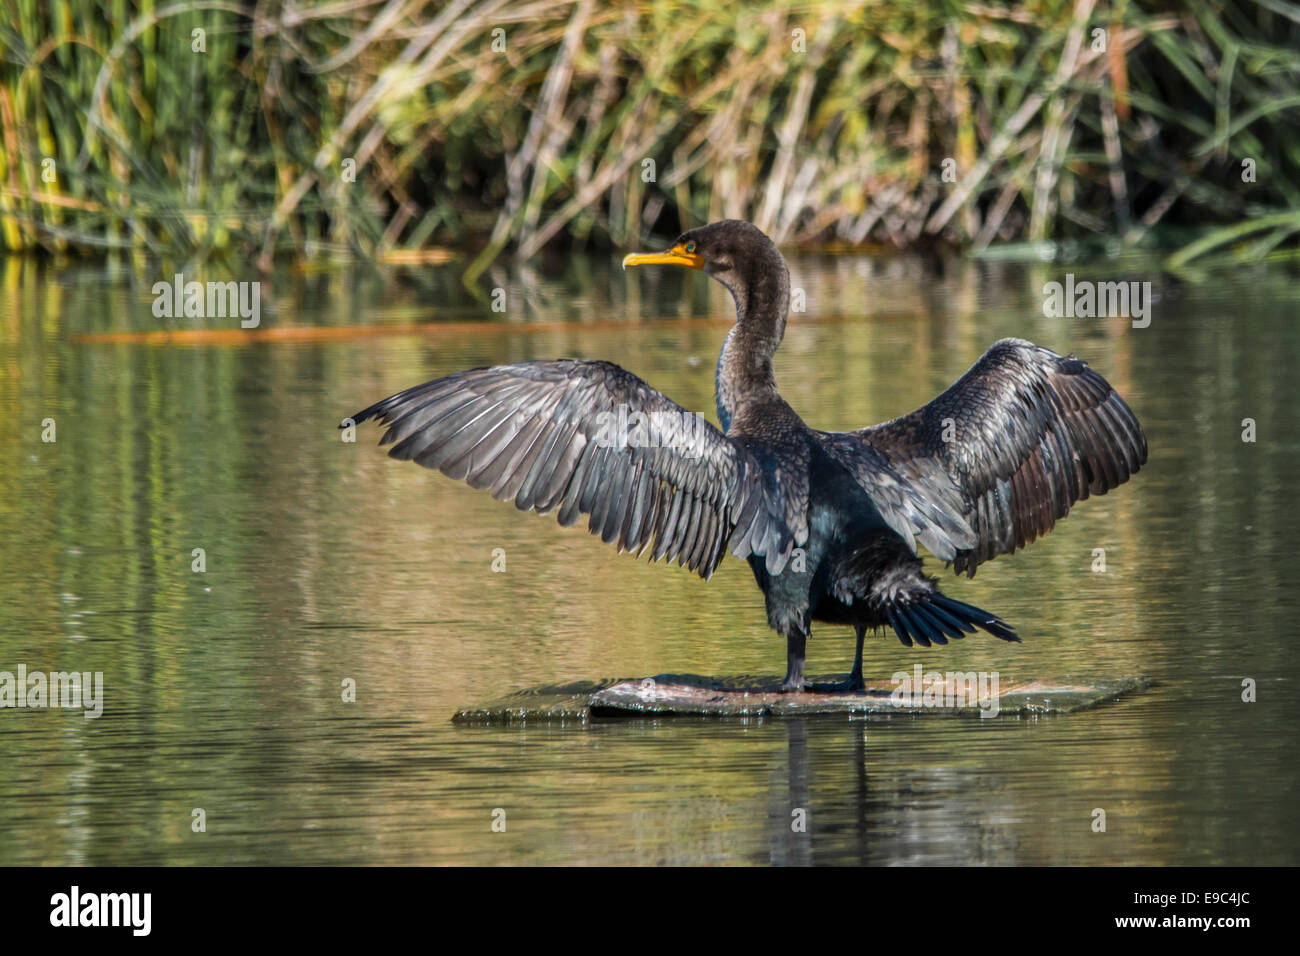 Juvenal cormorant with wings spread out to dry at Neary Lagoon. Stock Photo